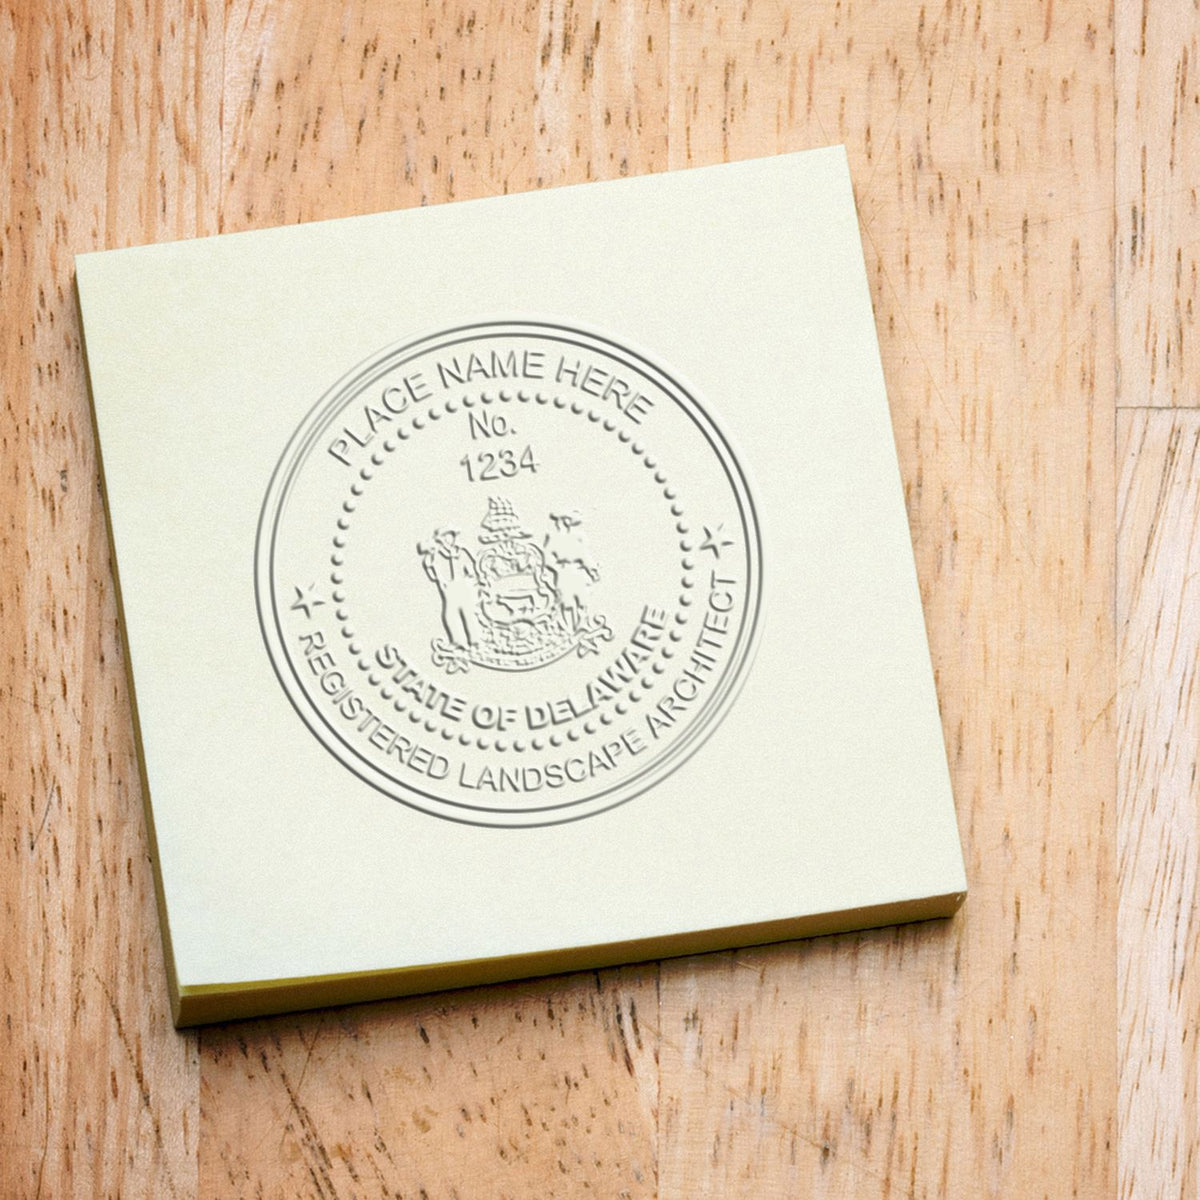 An alternative view of the Gift Delaware Landscape Architect Seal stamped on a sheet of paper showing the image in use